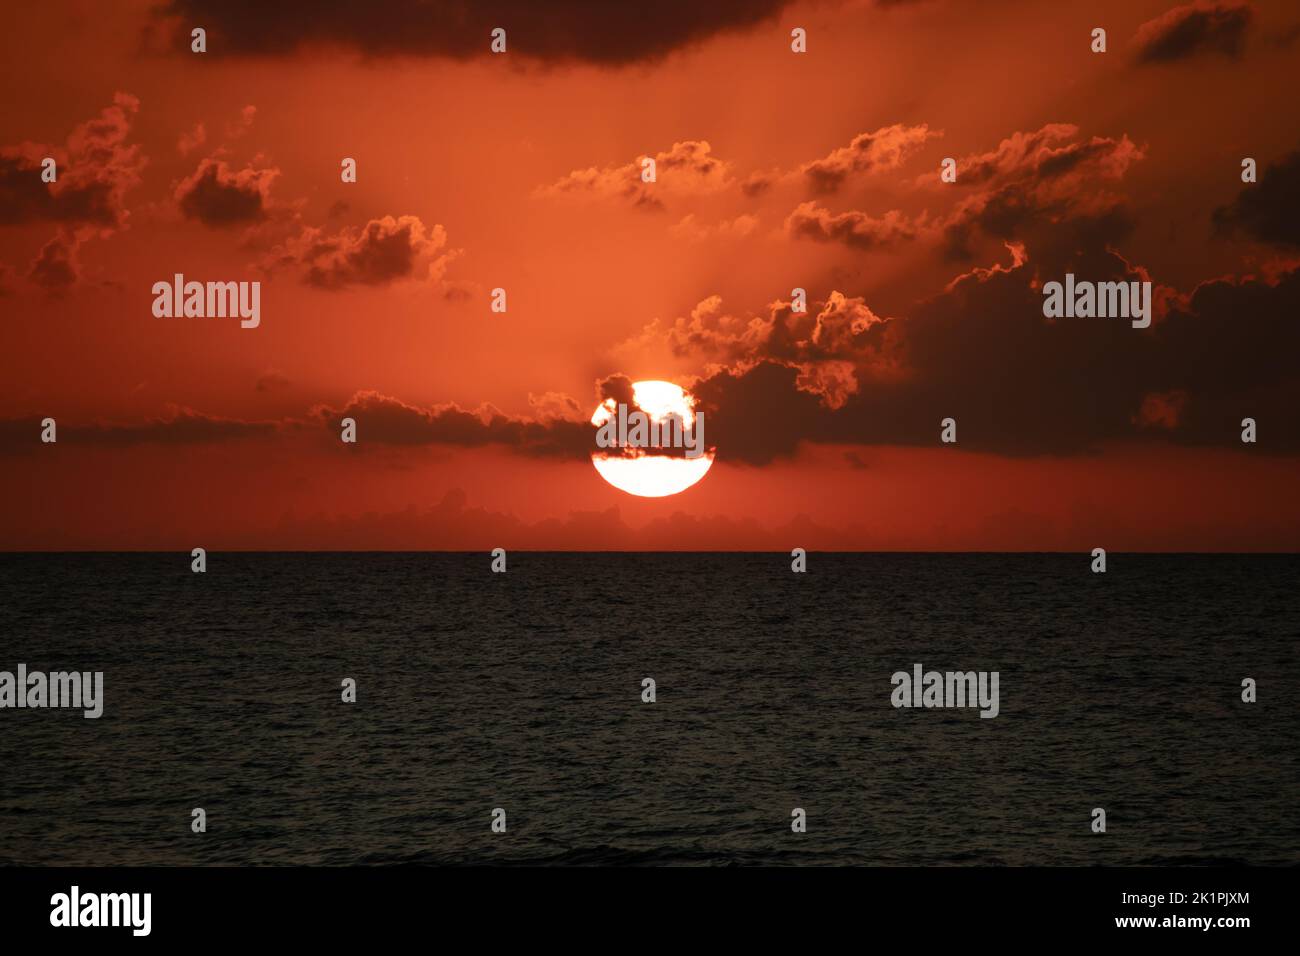 Sunset view, sunset view over the sea. Orange sky and clouds, twilight colors. The sun's bright round disk will soon disappear behind clouds. Stock Photo